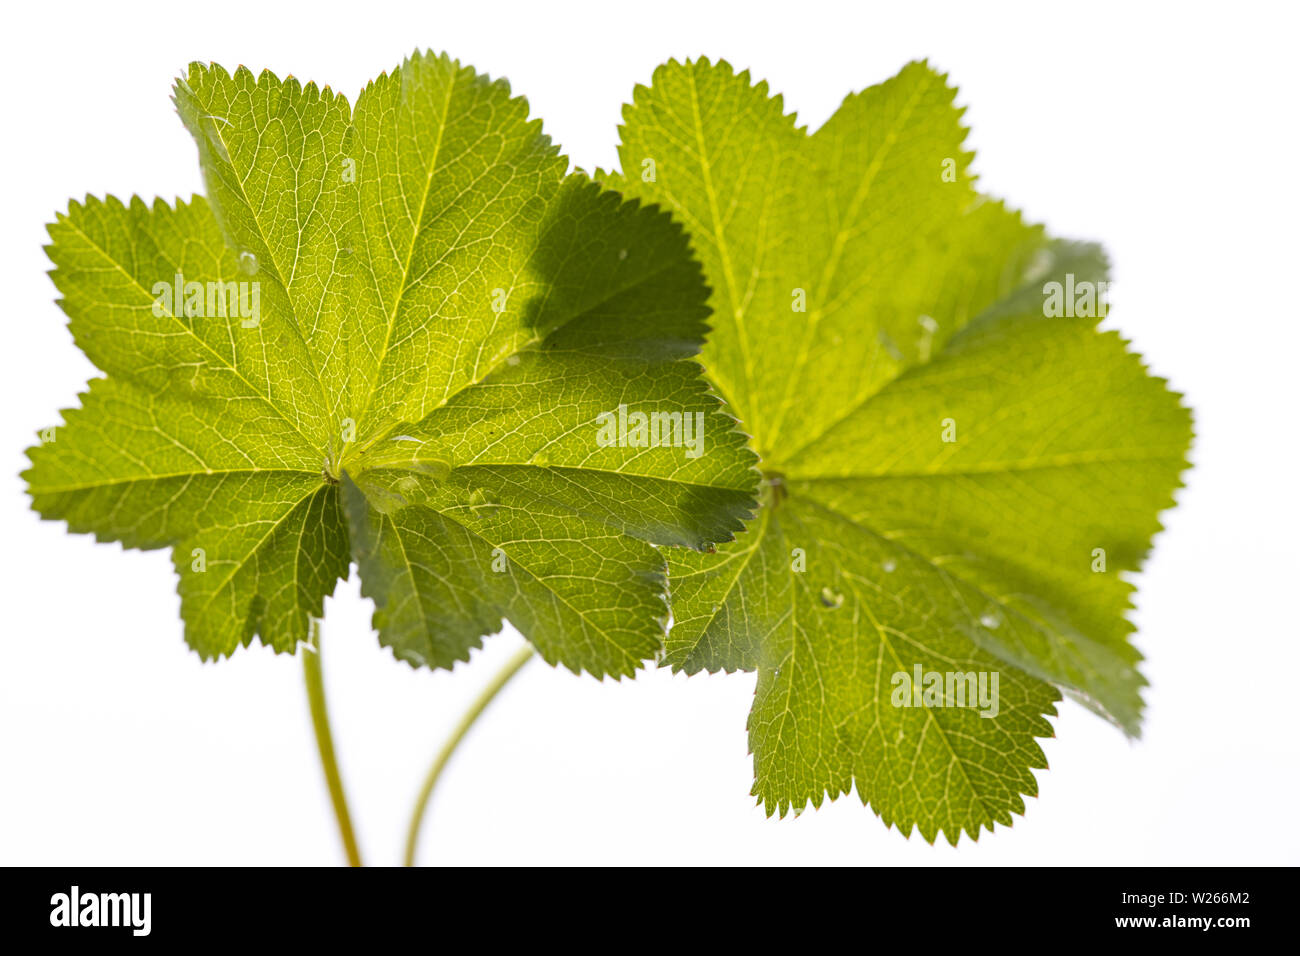 healing / medicinal plants: lady's mantle (Alchemilla vulgaris) - two leafs isolated on white background Stock Photo